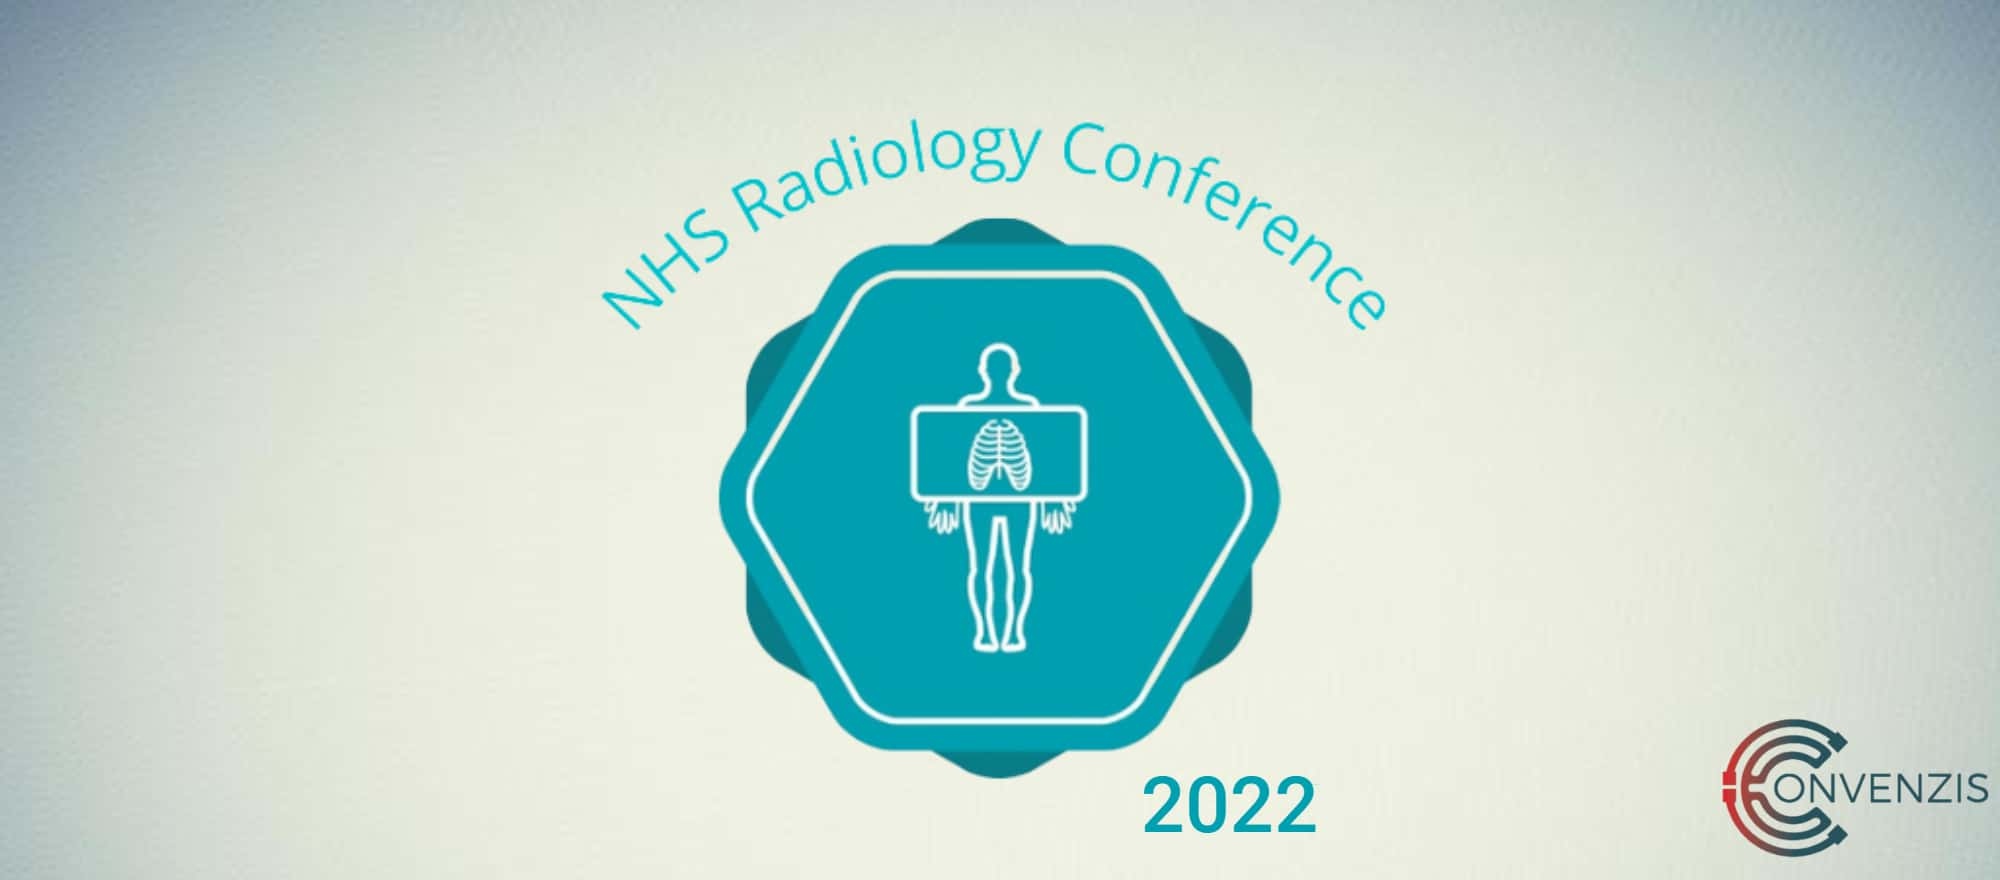 The NHS Radiology Conference 2022